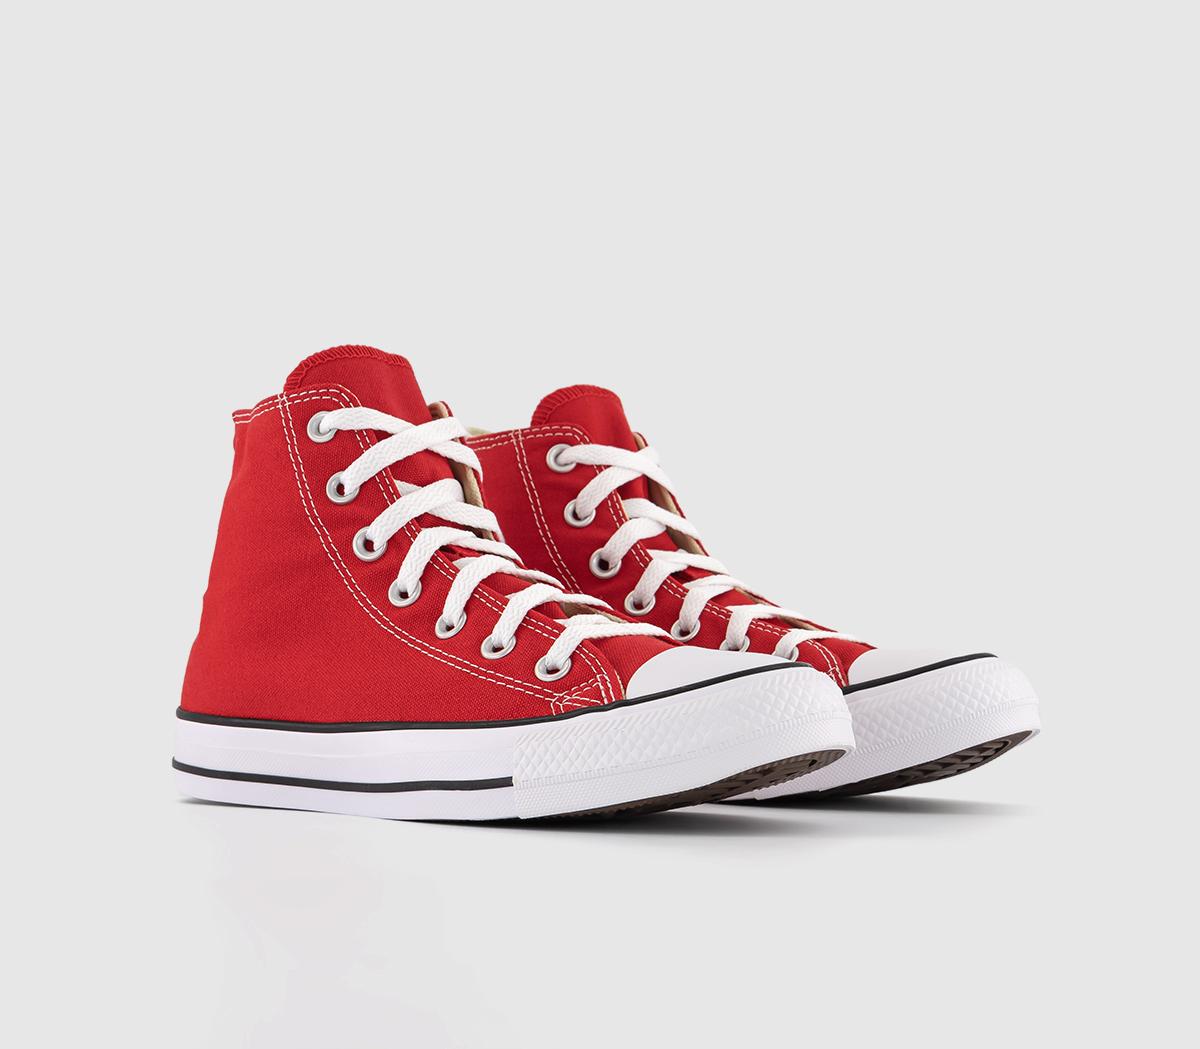 Converse All Star High Top Red, White And Blue Canvas Printed Trainers, 7